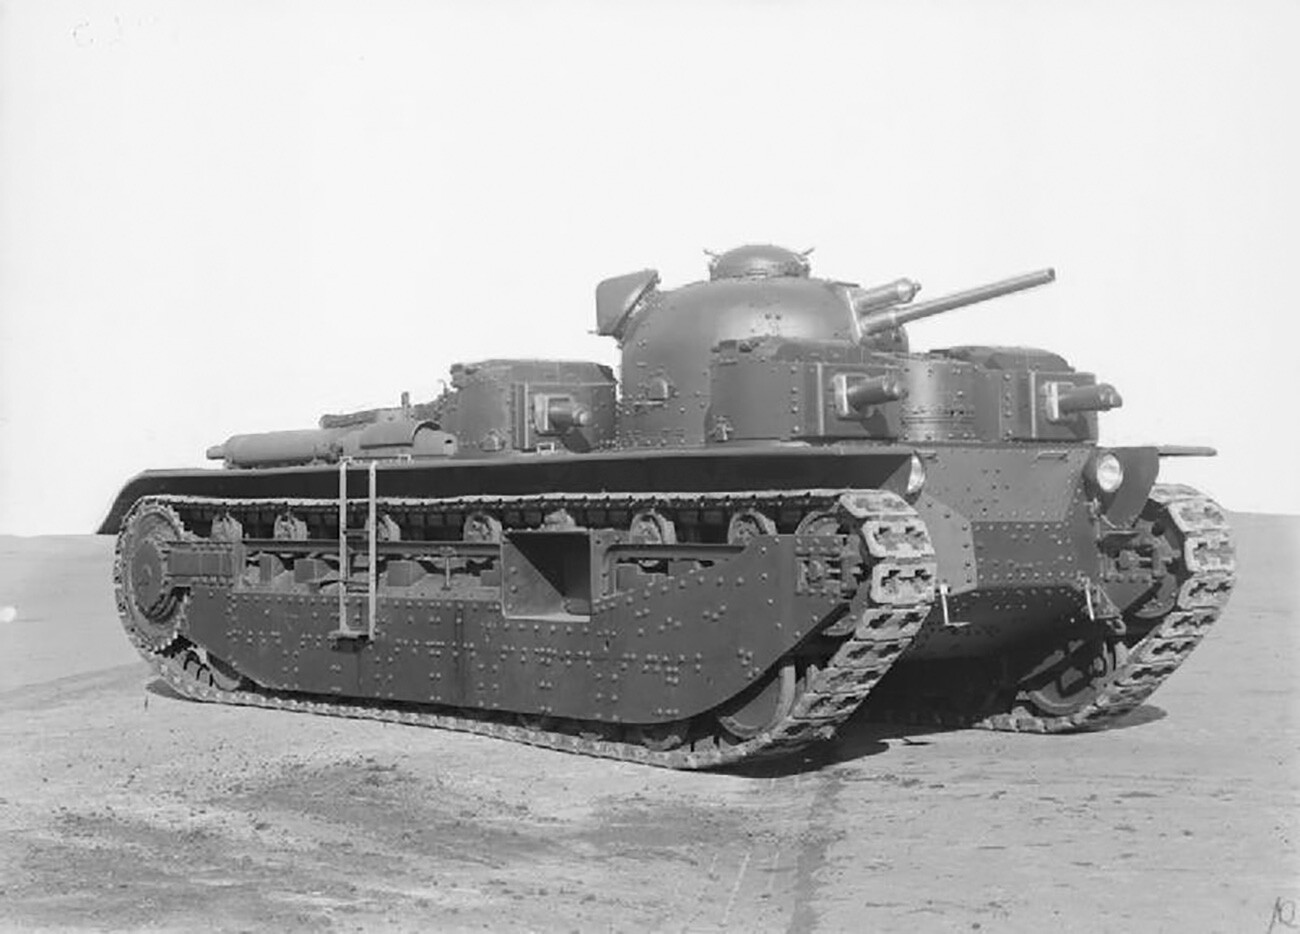 Vickers 'Independent' Heavy Tank (A1E1).